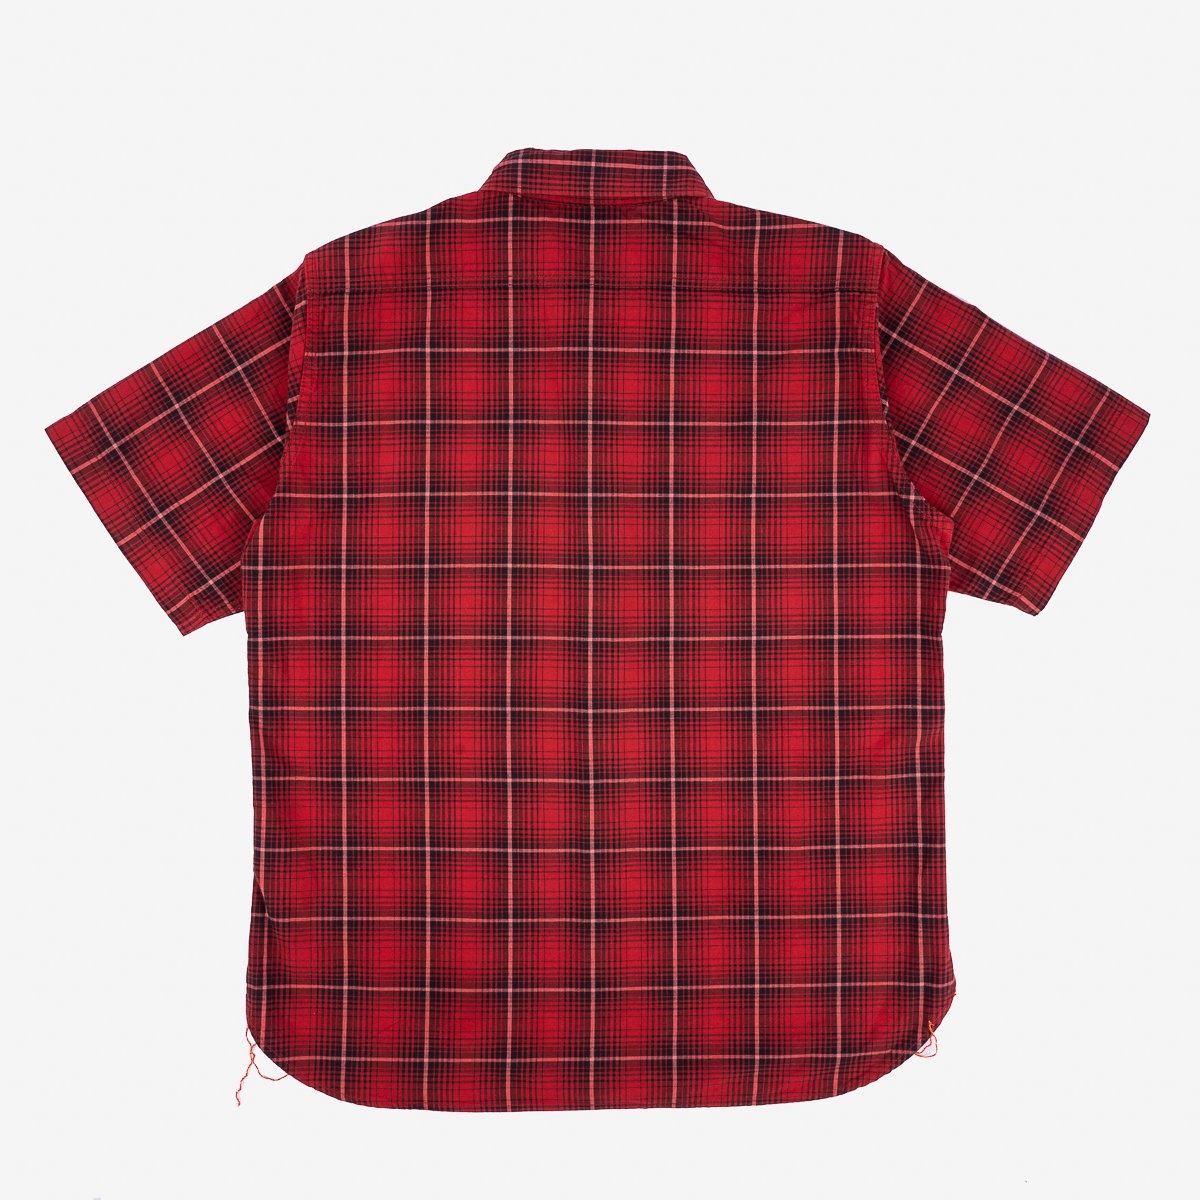 IHSH-392-RED 5oz Selvedge Short Sleeved Work Shirt - Red Vintage Check - 5